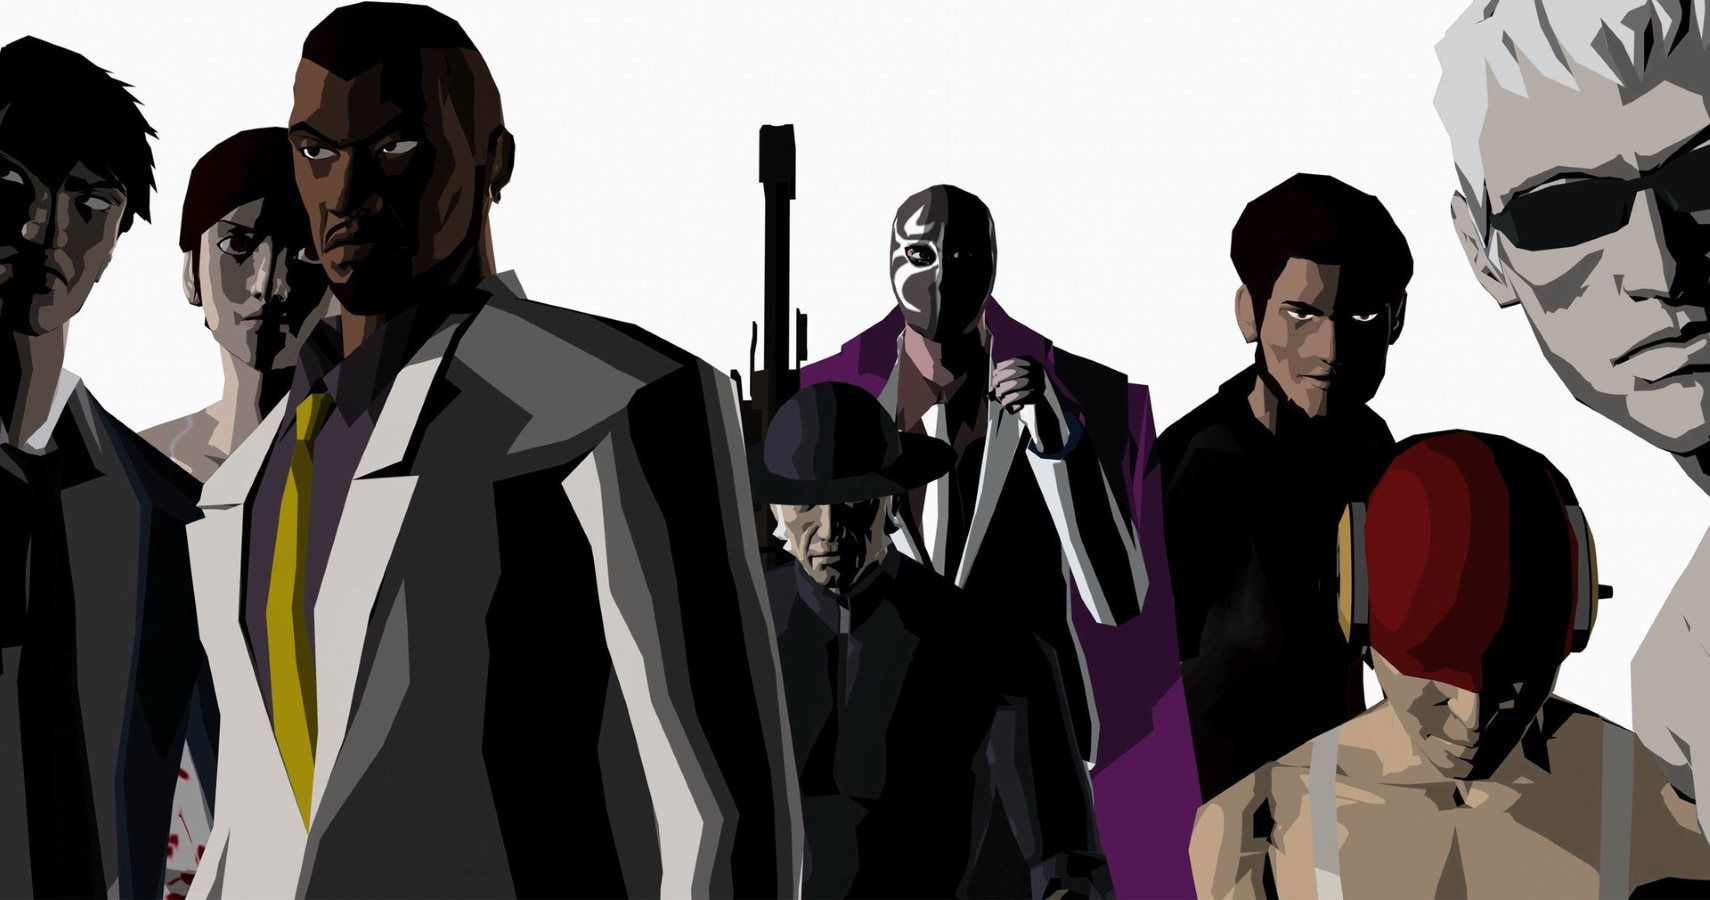 Cult Classic Killer7 Getting Remastered For PC